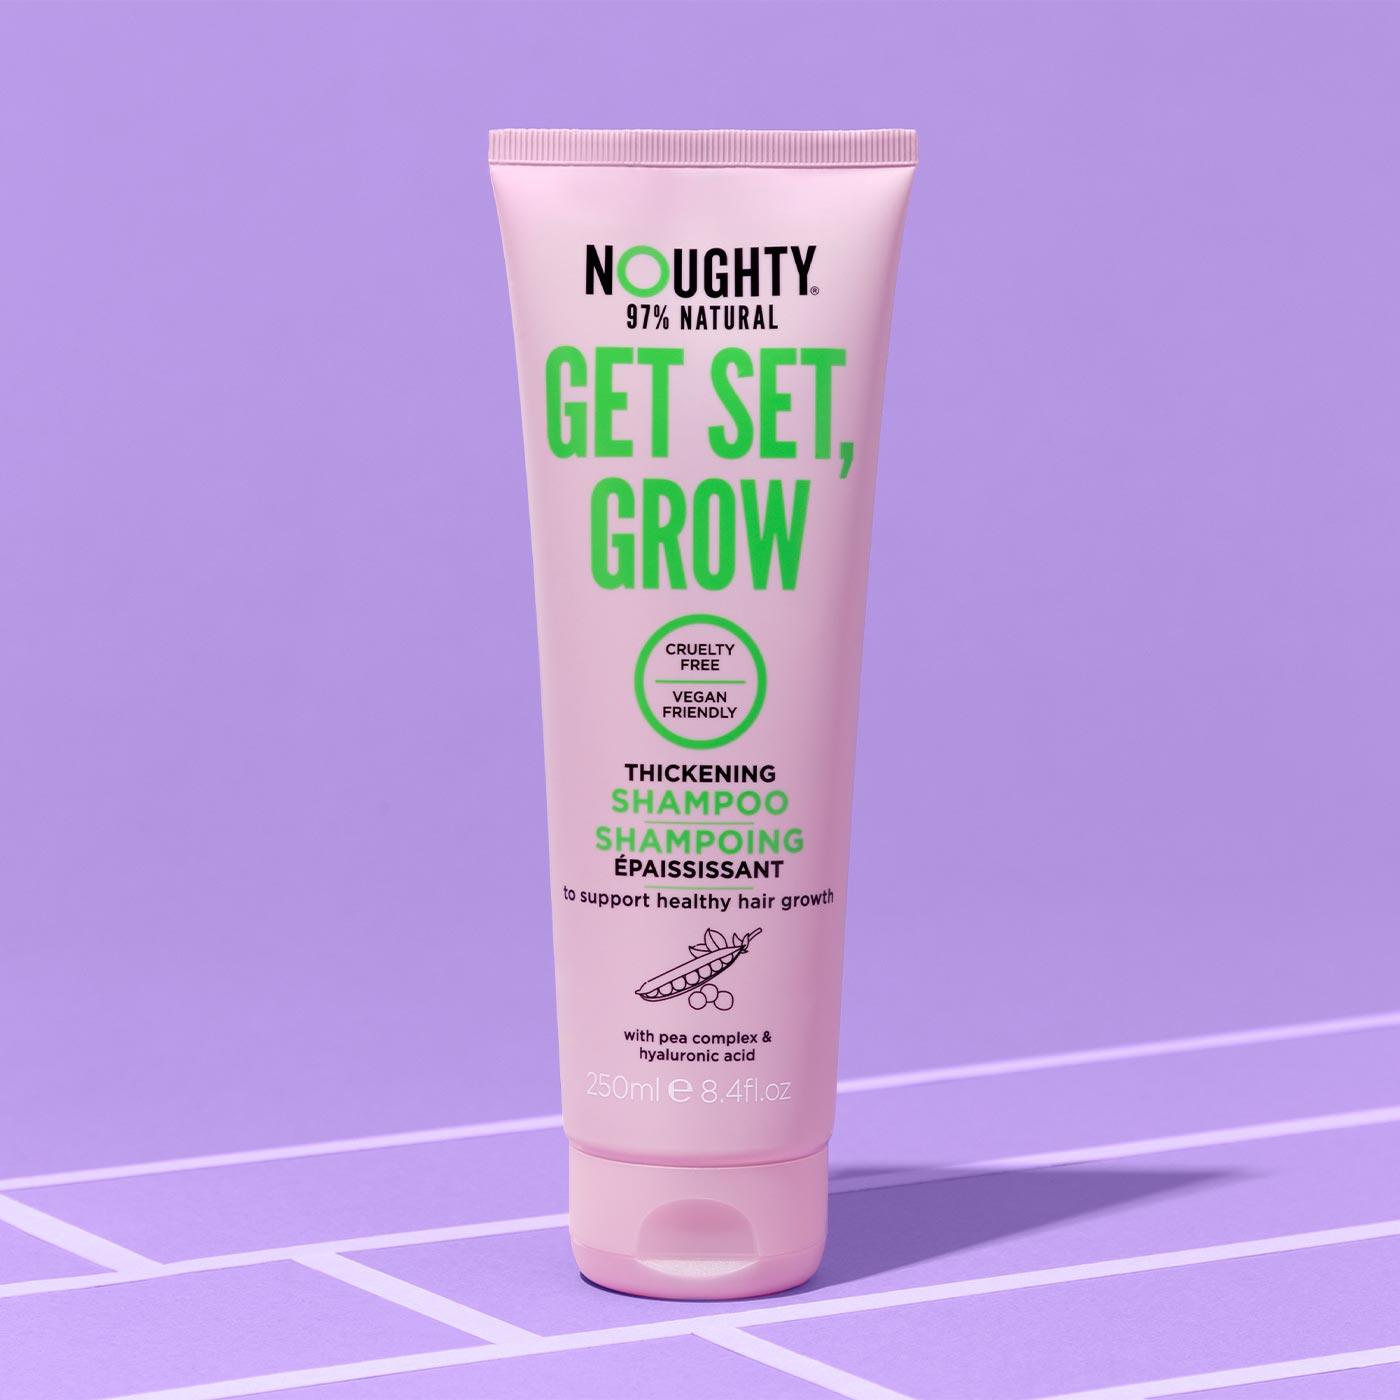 Noughty Hair Get Set, Grow Thickening Shampoo